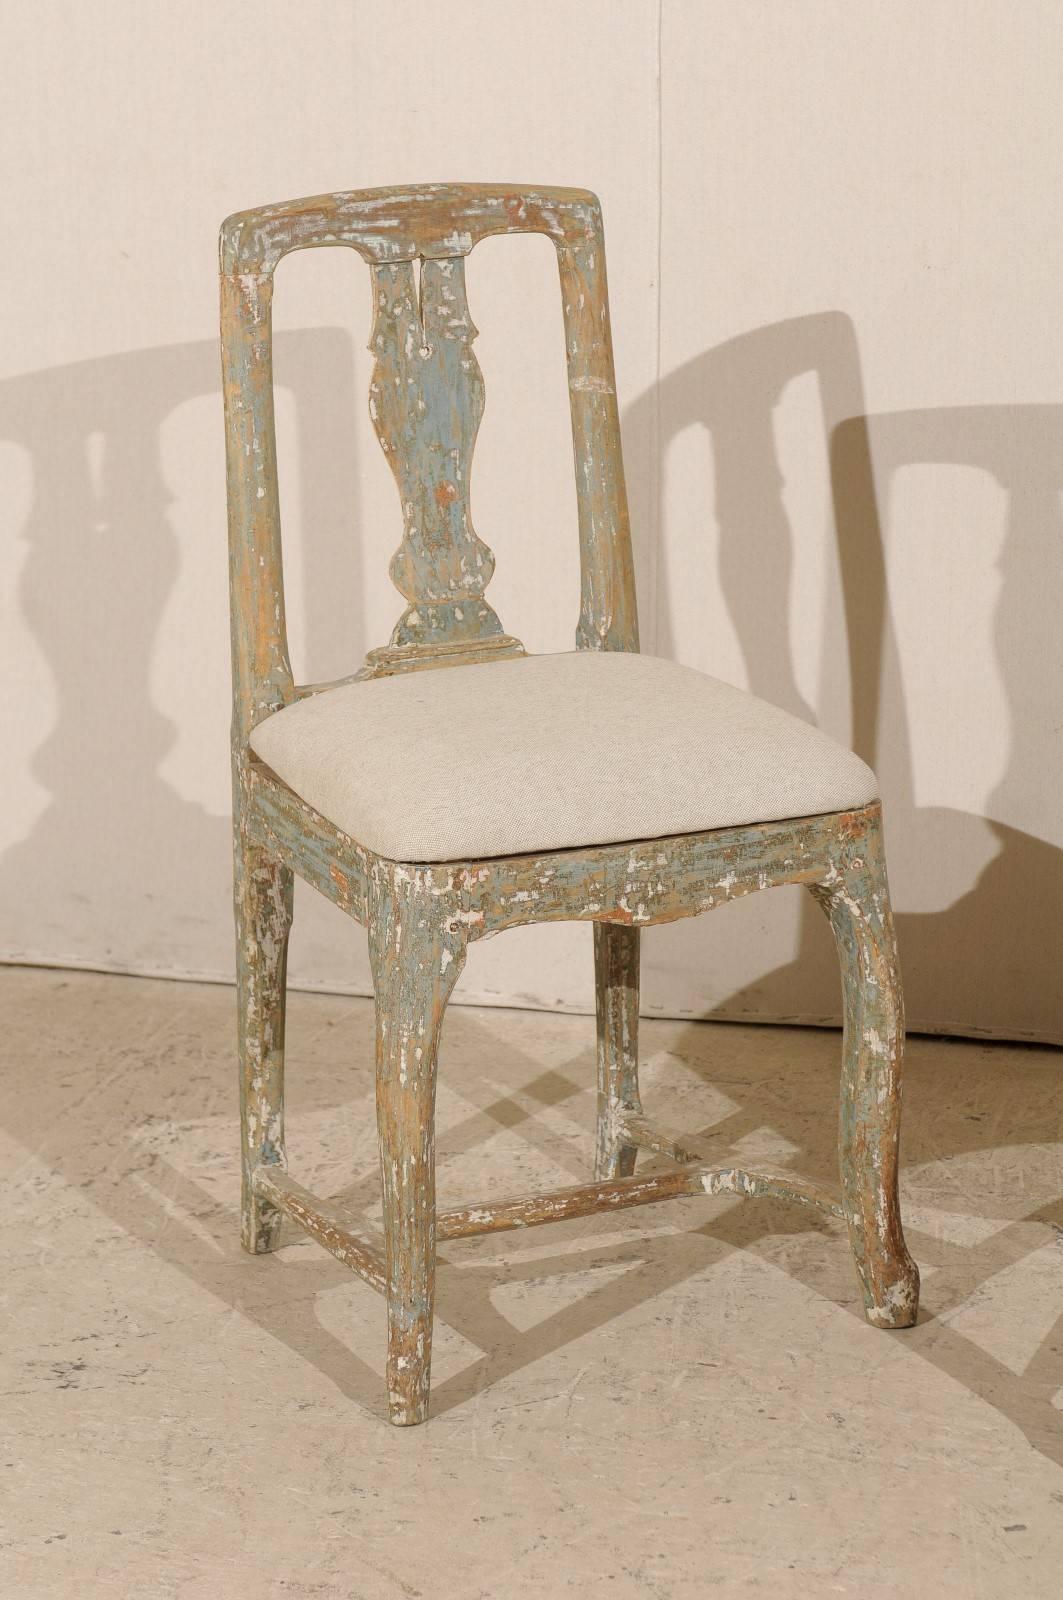 Carved Pair of Swedish Period Rococo Side Chairs in Soft Green, Beige and White Color